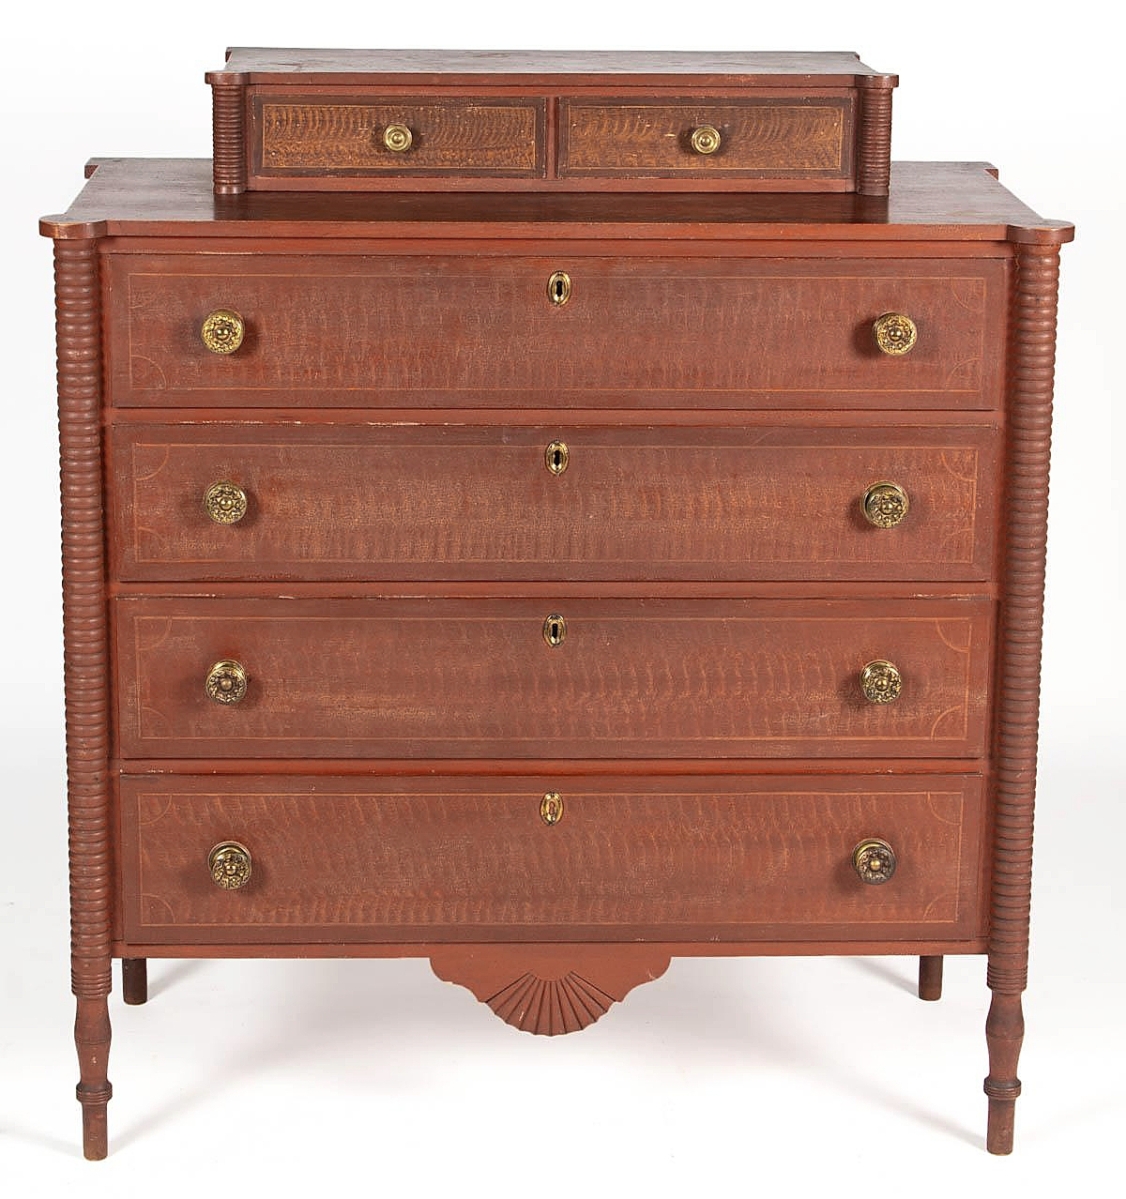 203 NH Red Painted chest of drawers